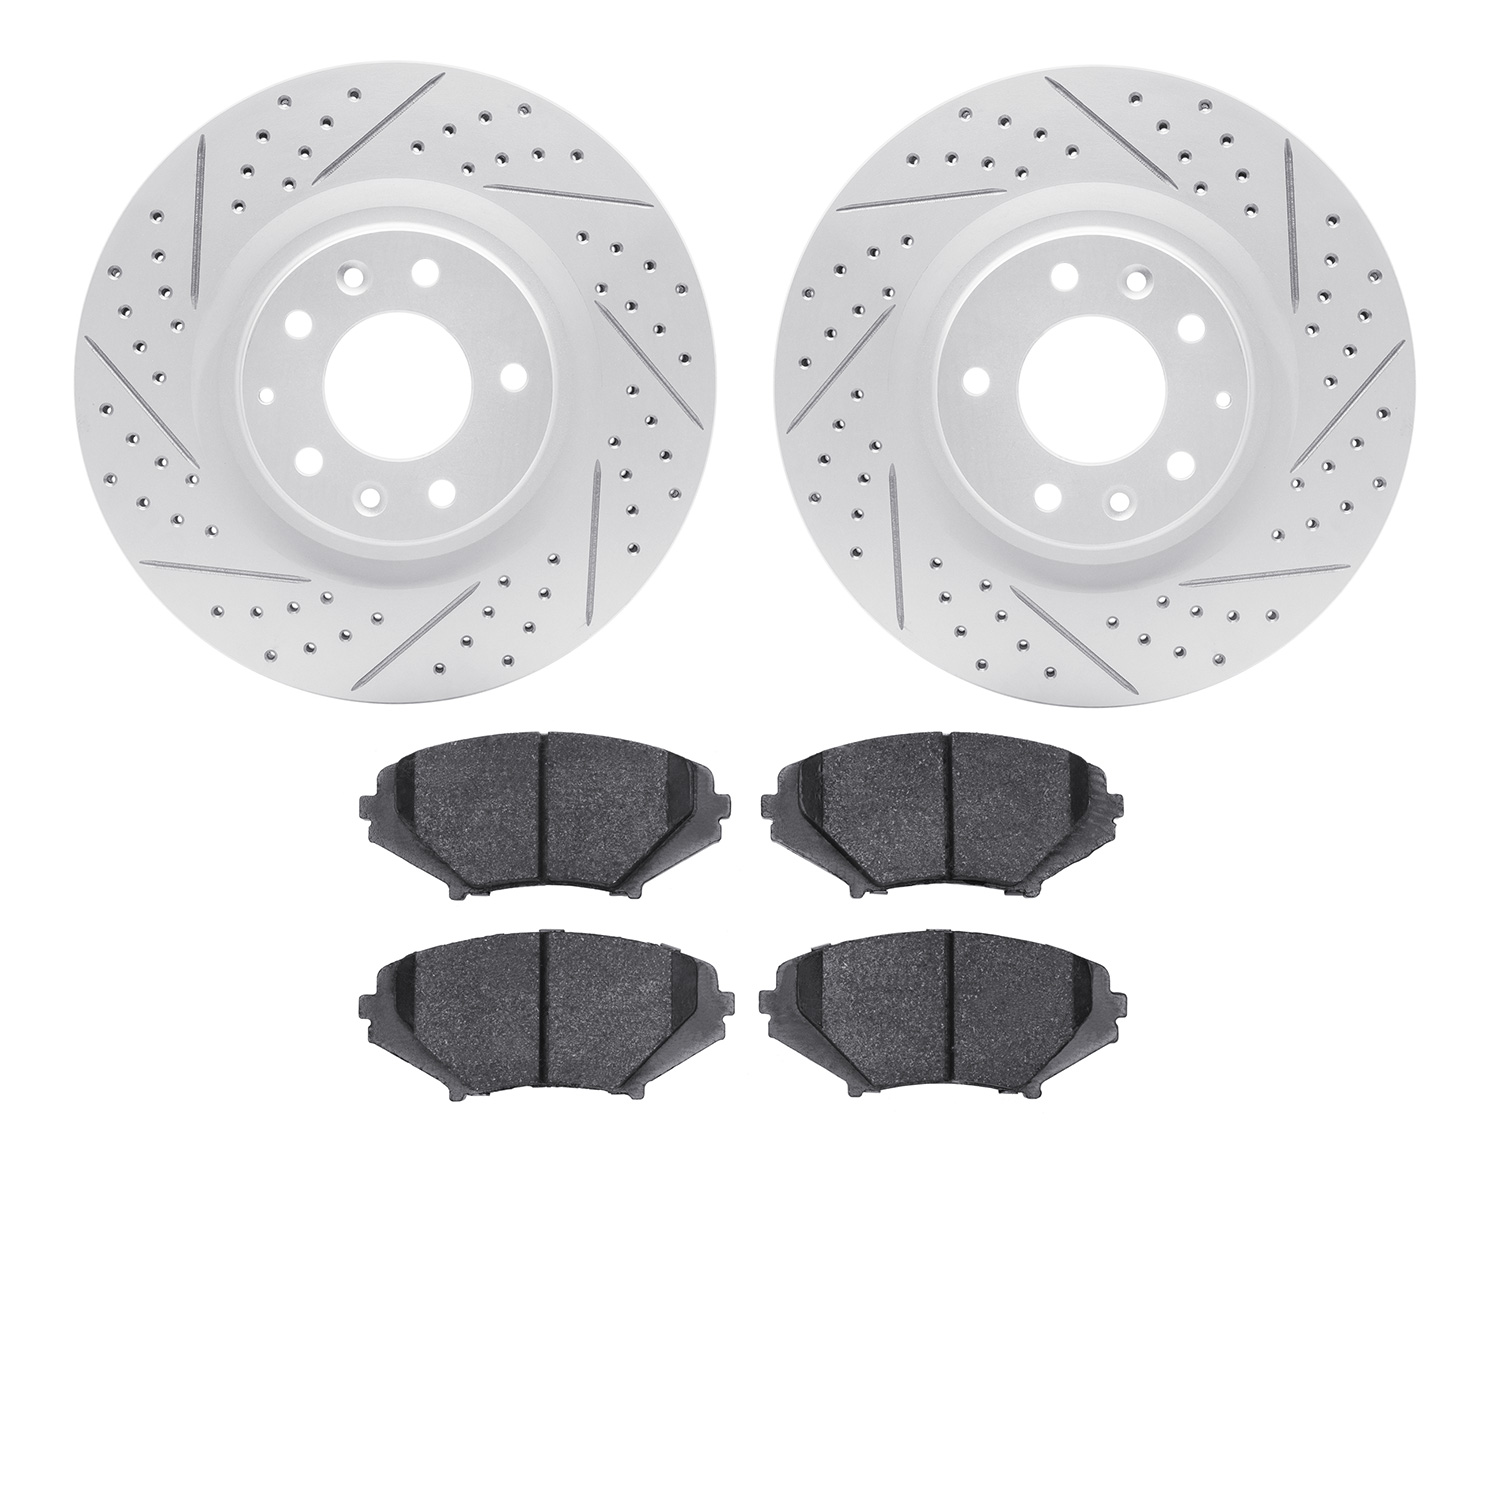 2502-80020 Geoperformance Drilled/Slotted Rotors w/5000 Advanced Brake Pads Kit, 2004-2011 Ford/Lincoln/Mercury/Mazda, Position: